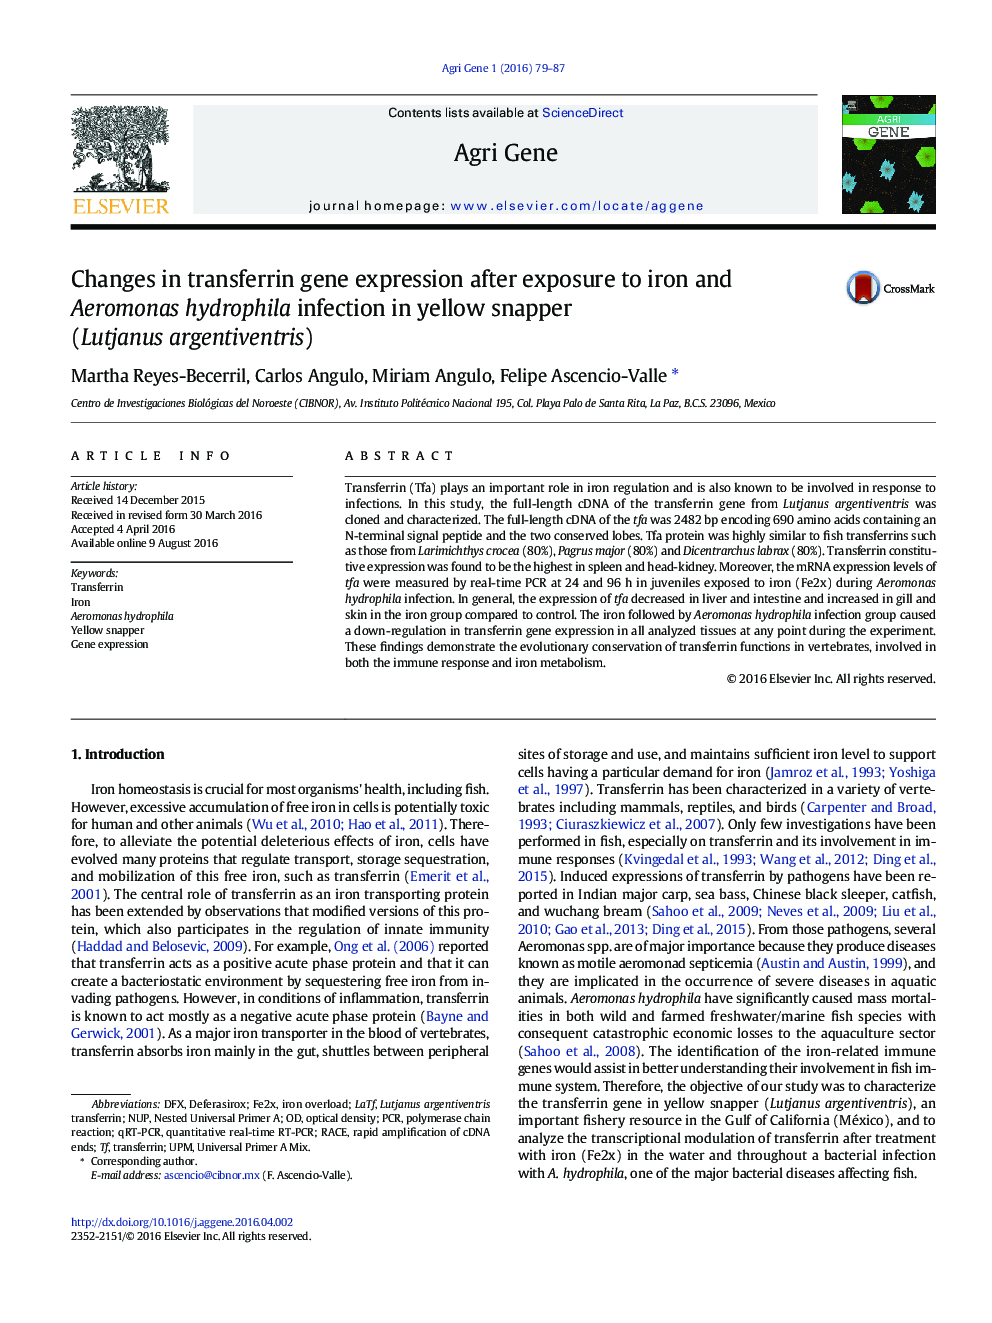 Changes in transferrin gene expression after exposure to iron and Aeromonas hydrophila infection in yellow snapper (Lutjanus argentiventris)